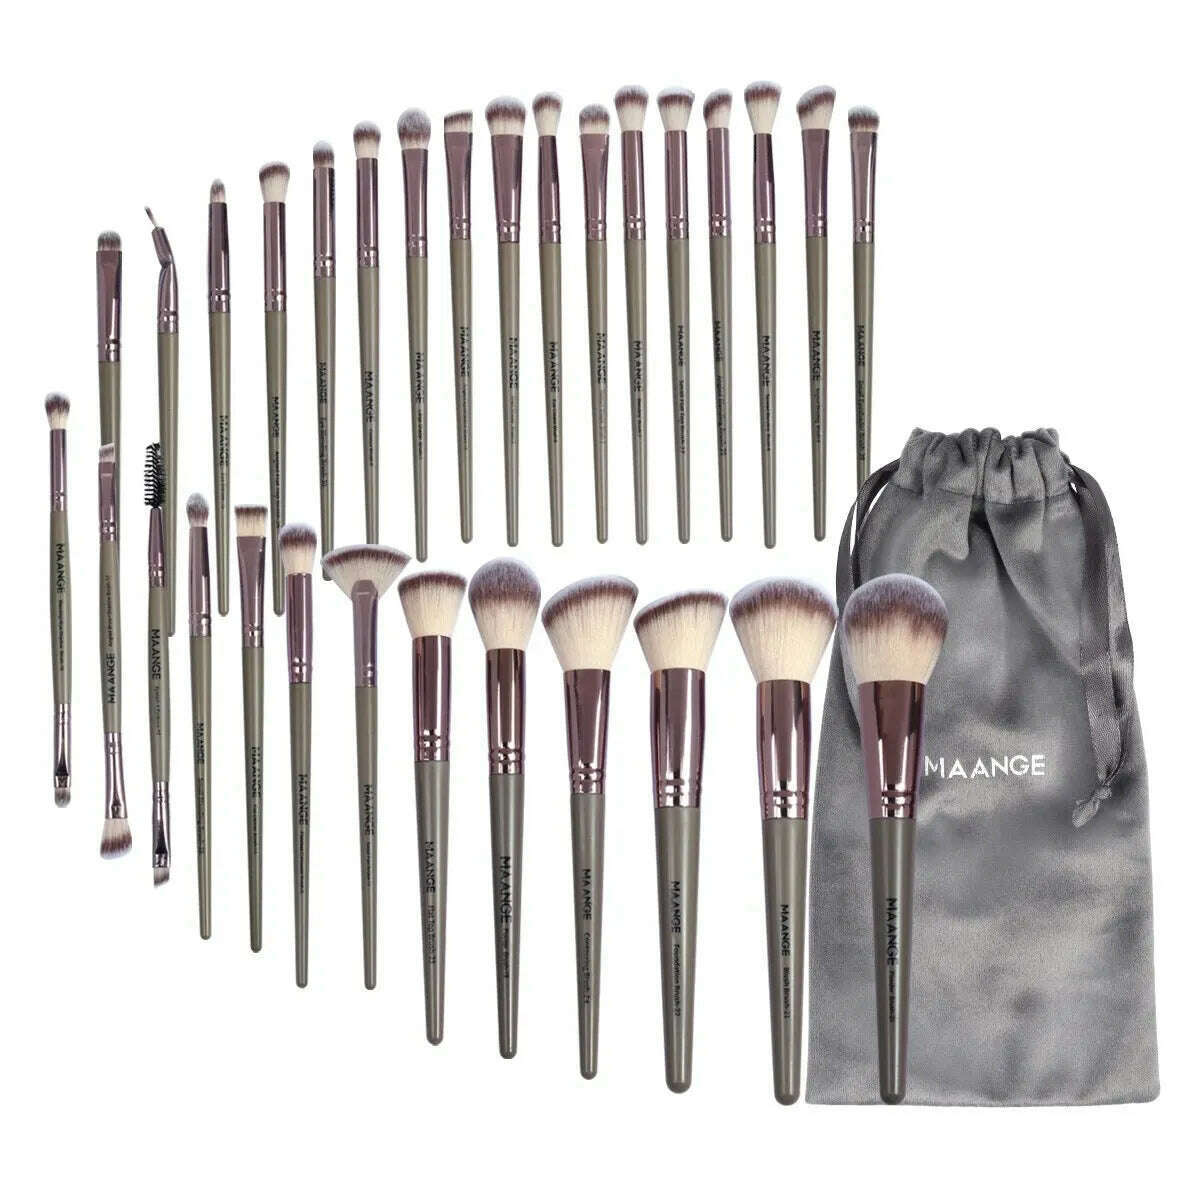 KIMLUD, MAANGE 30pcs Professional Makeup Brush Set Foundation Concealers Eye Shadows Powder Blush Blending Brushes Beauty Tools with Bag, Champagne Gold, KIMLUD Womens Clothes